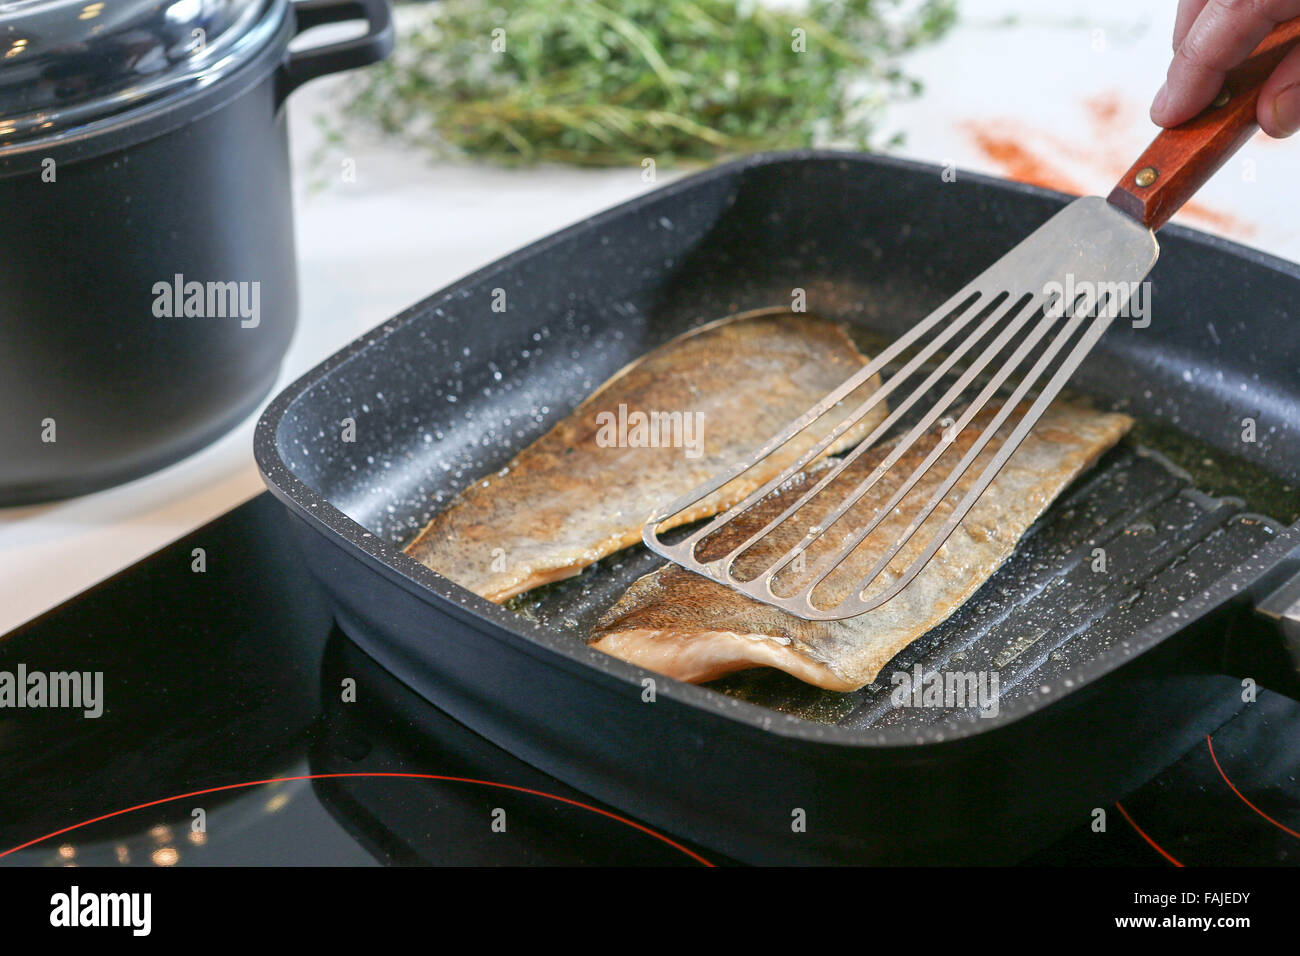 Frying fish on an electric stove Stock Photo